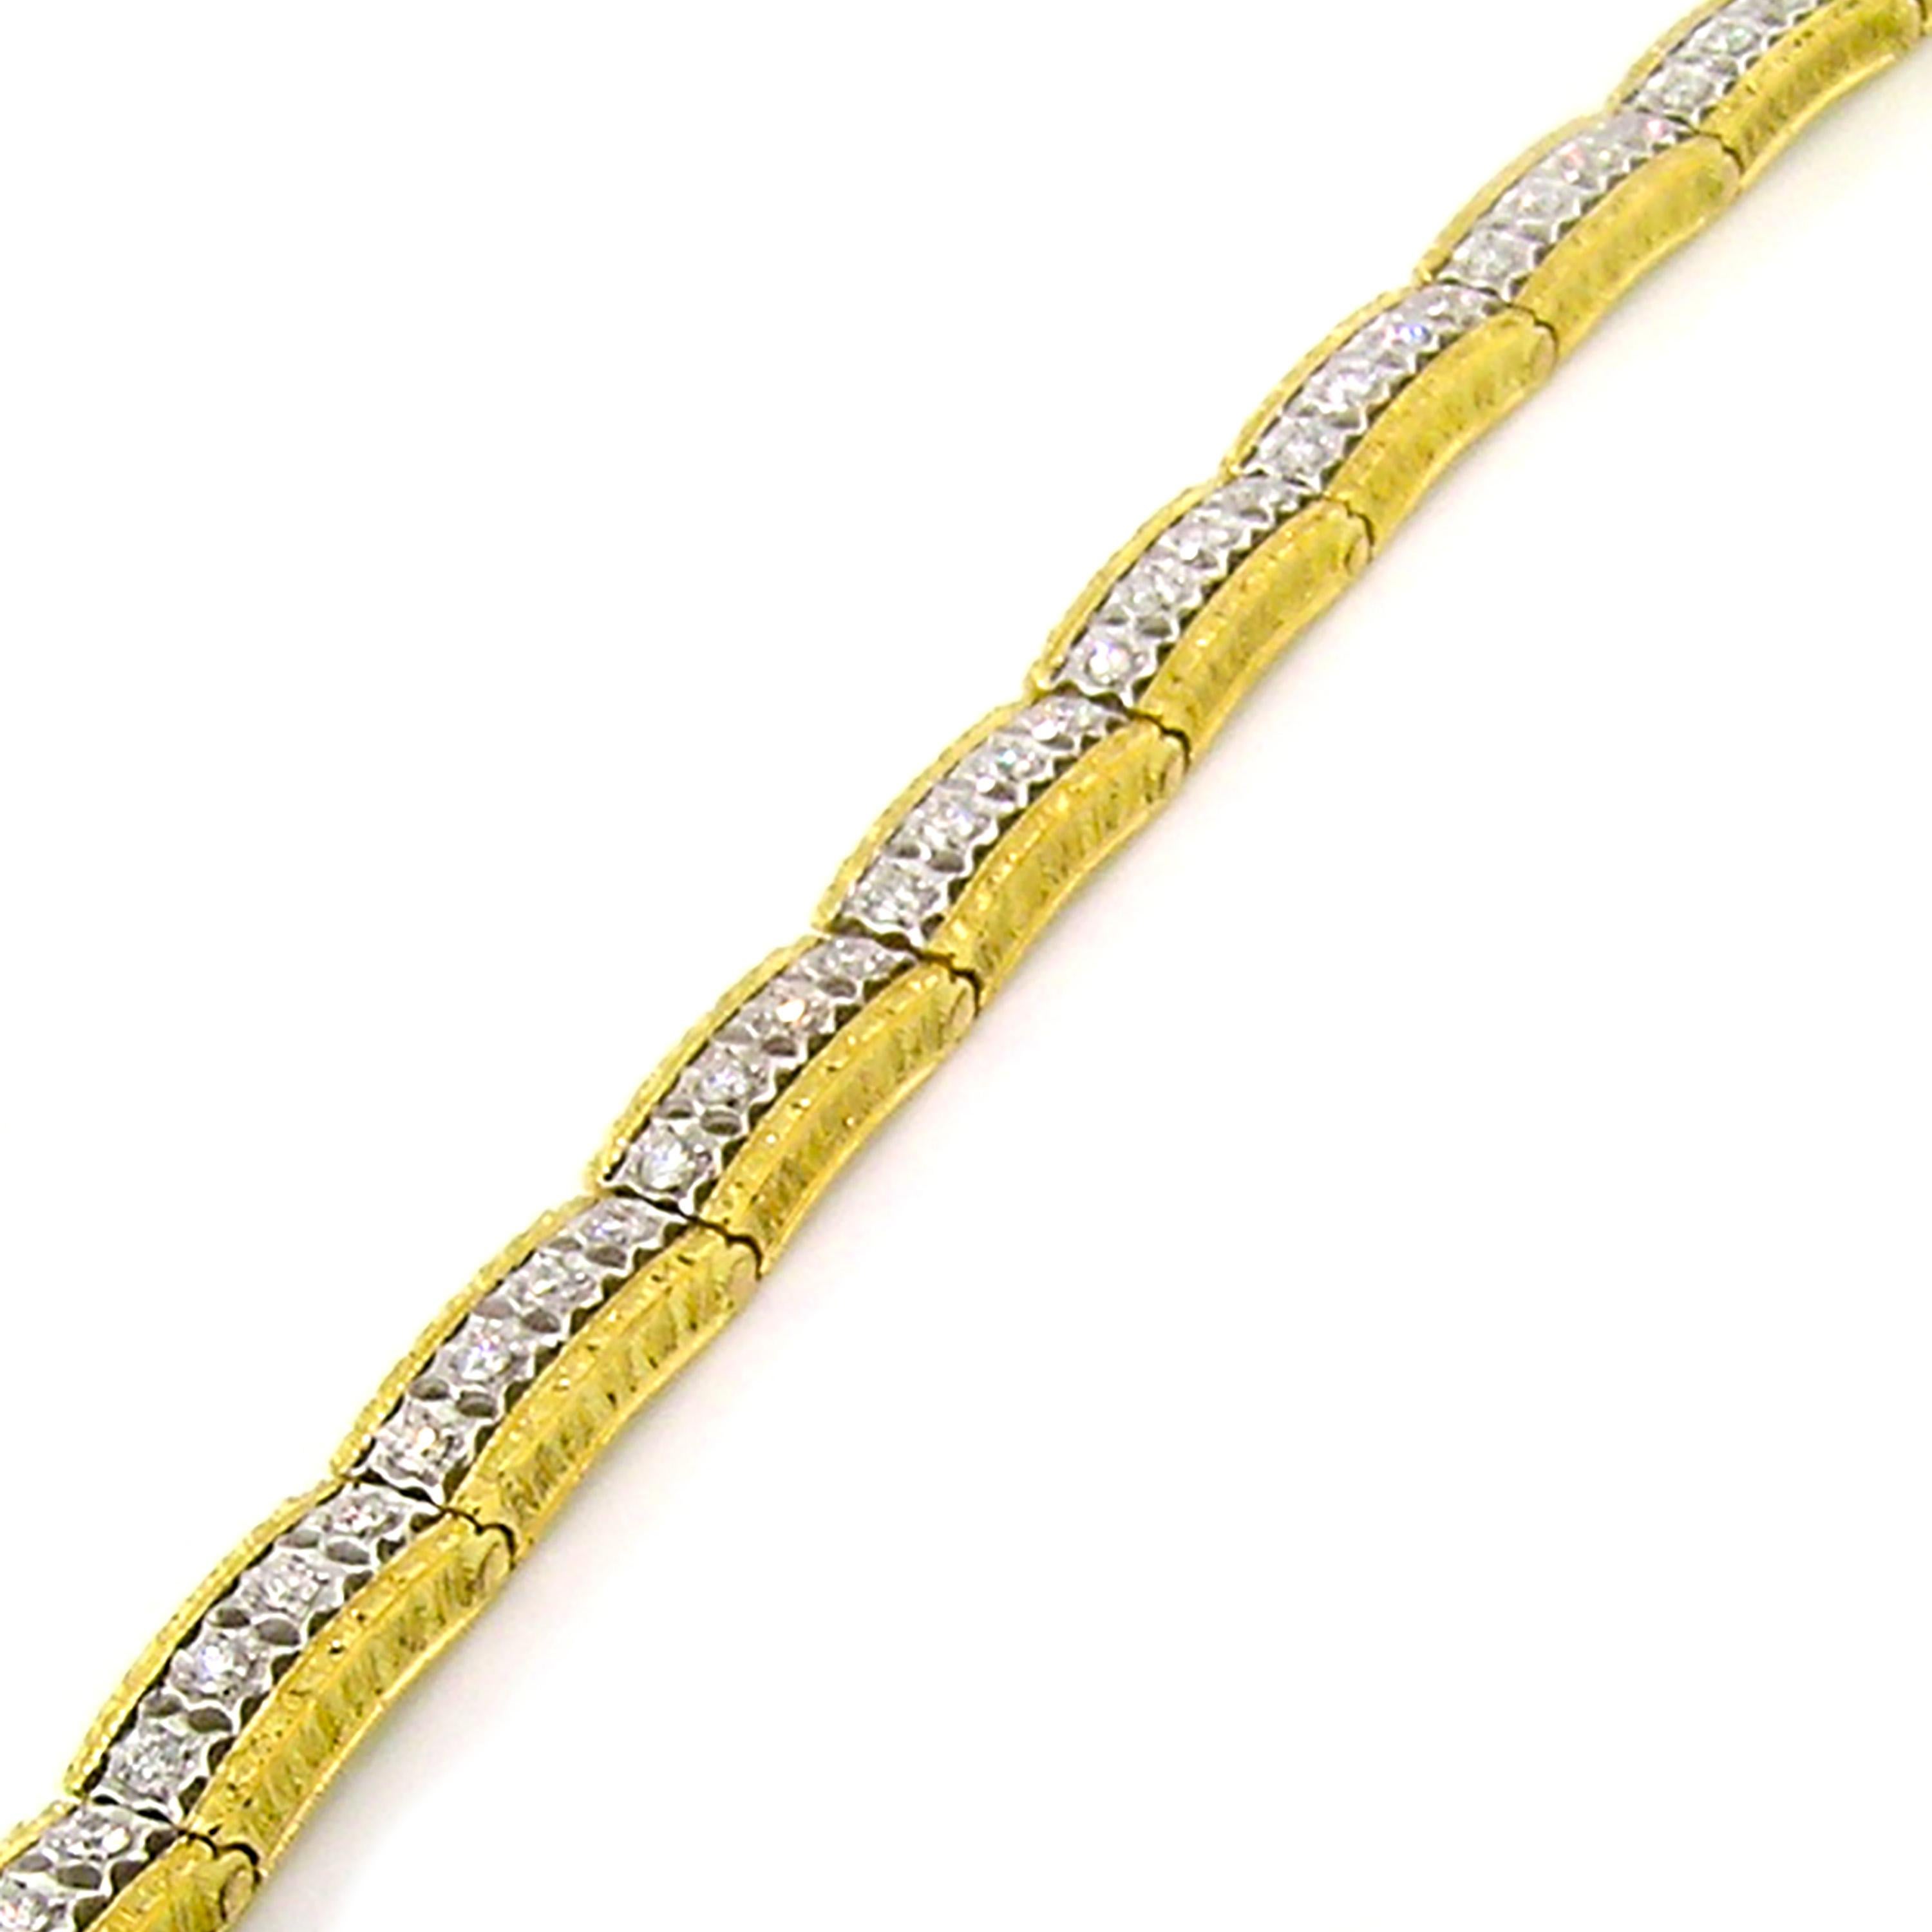 Round Cut 18kt Gold and Diamond Florentine Engraved Bracelet, Handmade in Italy For Sale